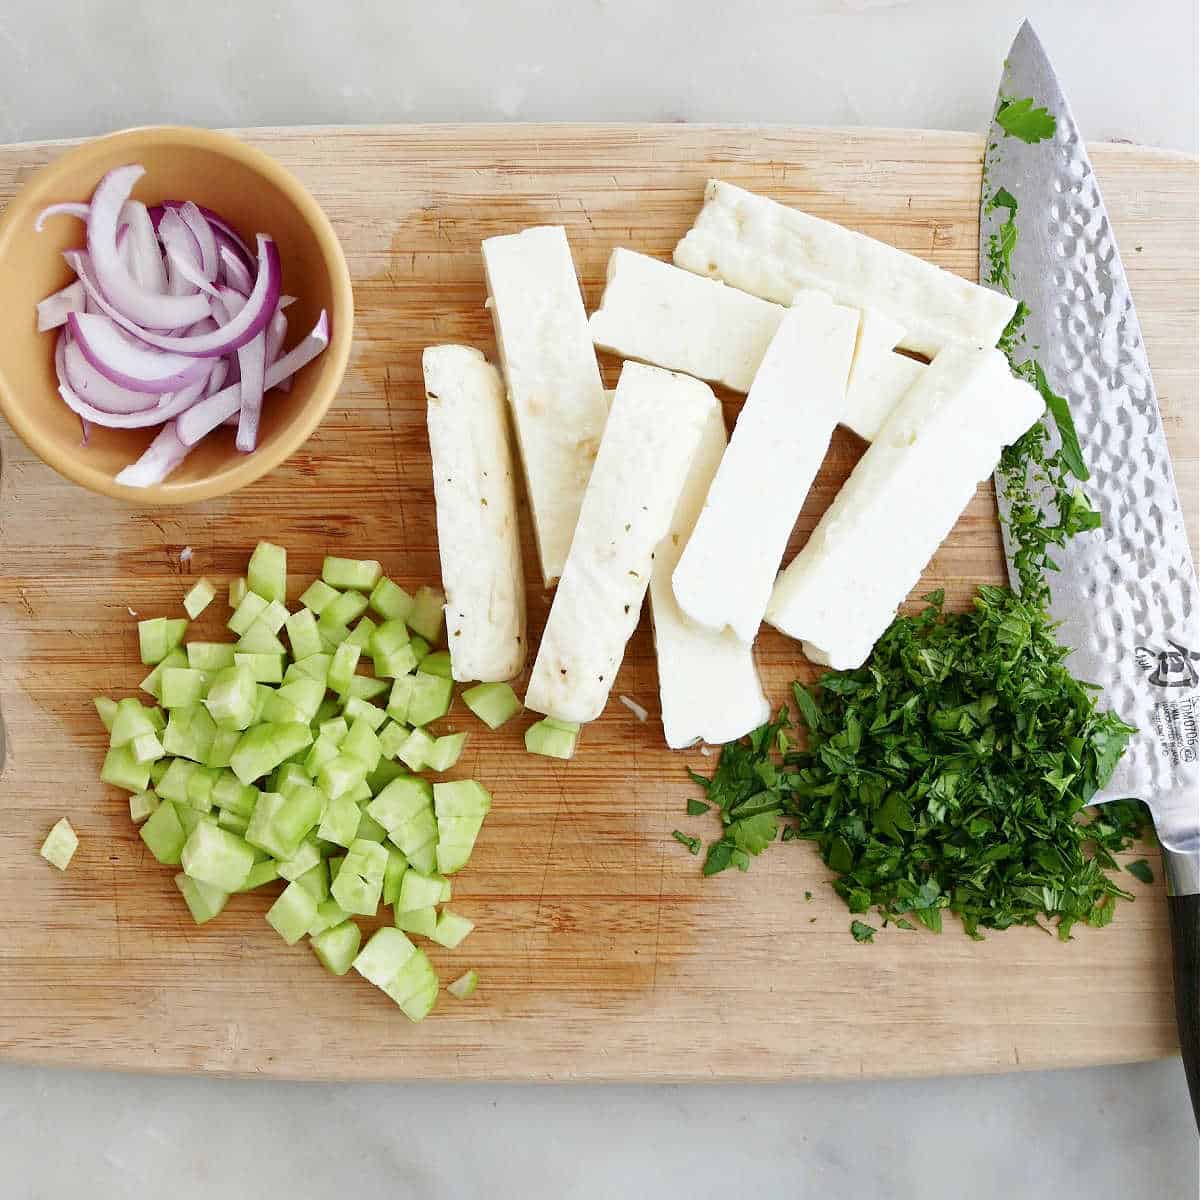 chopped vegetables and sliced halloumi cheese on a cutting board